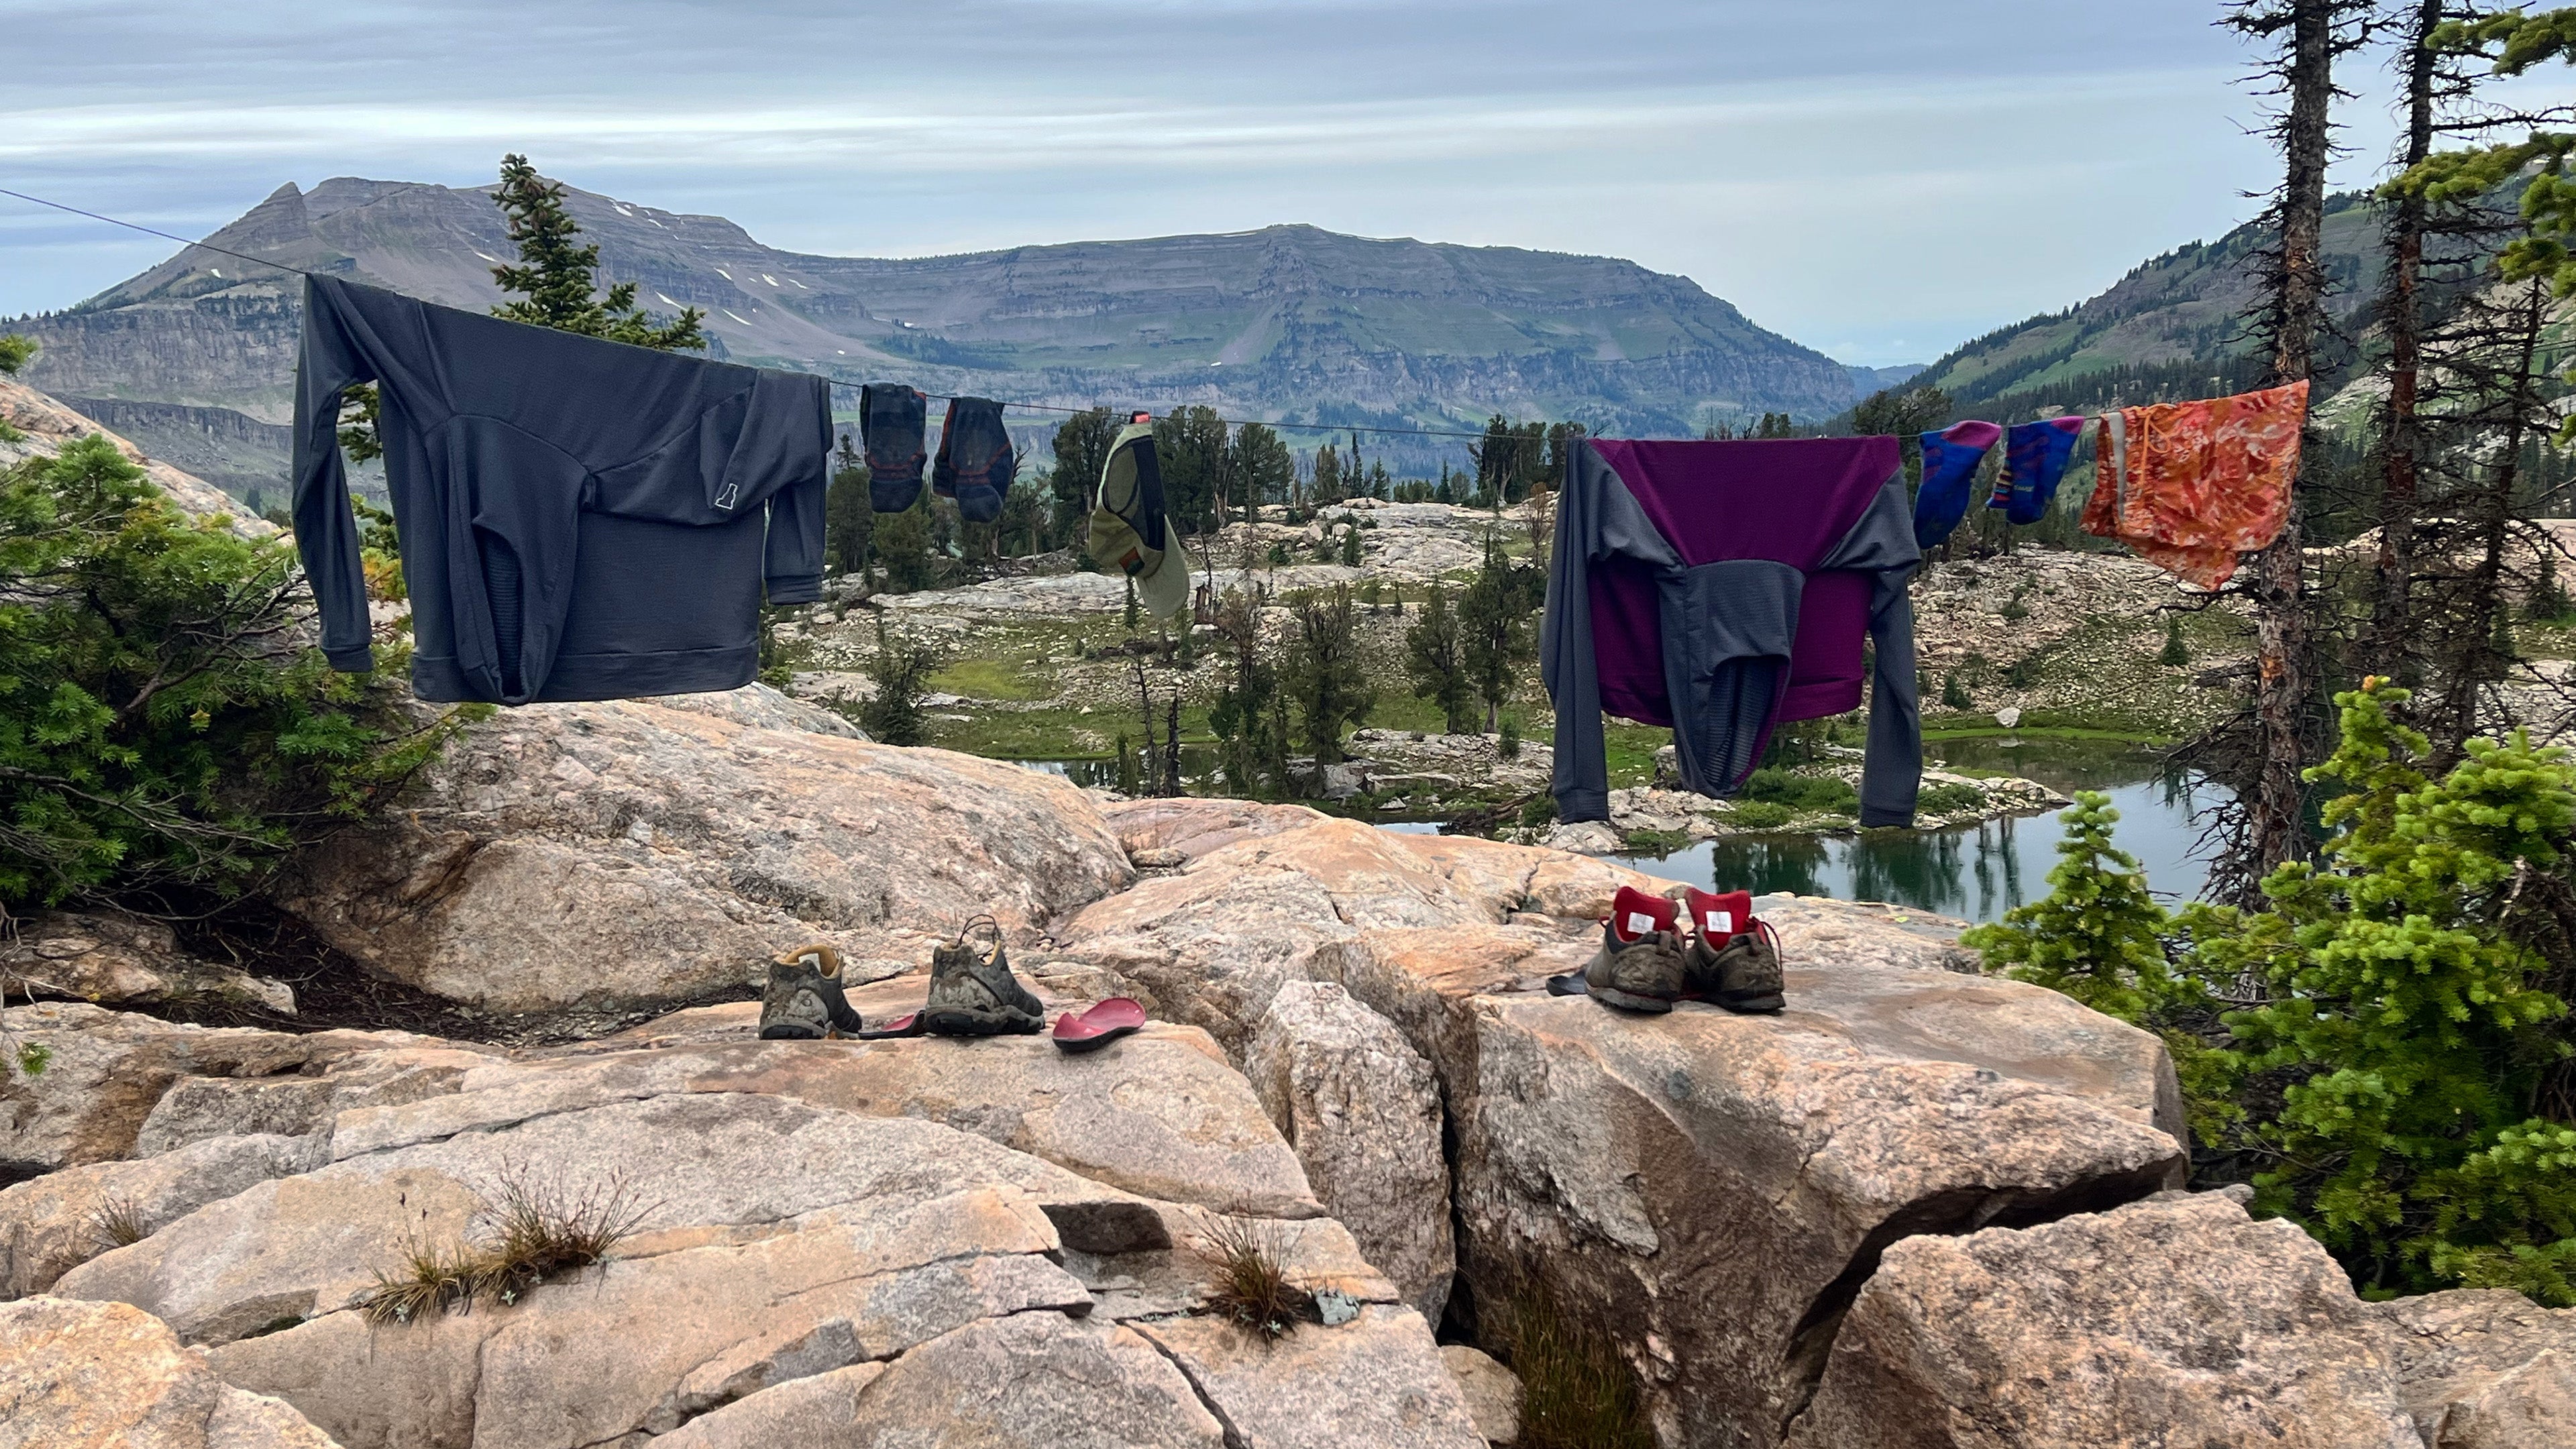 Two Thuja Ultralight Hell Brook Hoodies, one Forge Grey and one Forge Grey Plum combination, hanging on a clothes line in the backcountry mountains of Grand Teton National Park. 